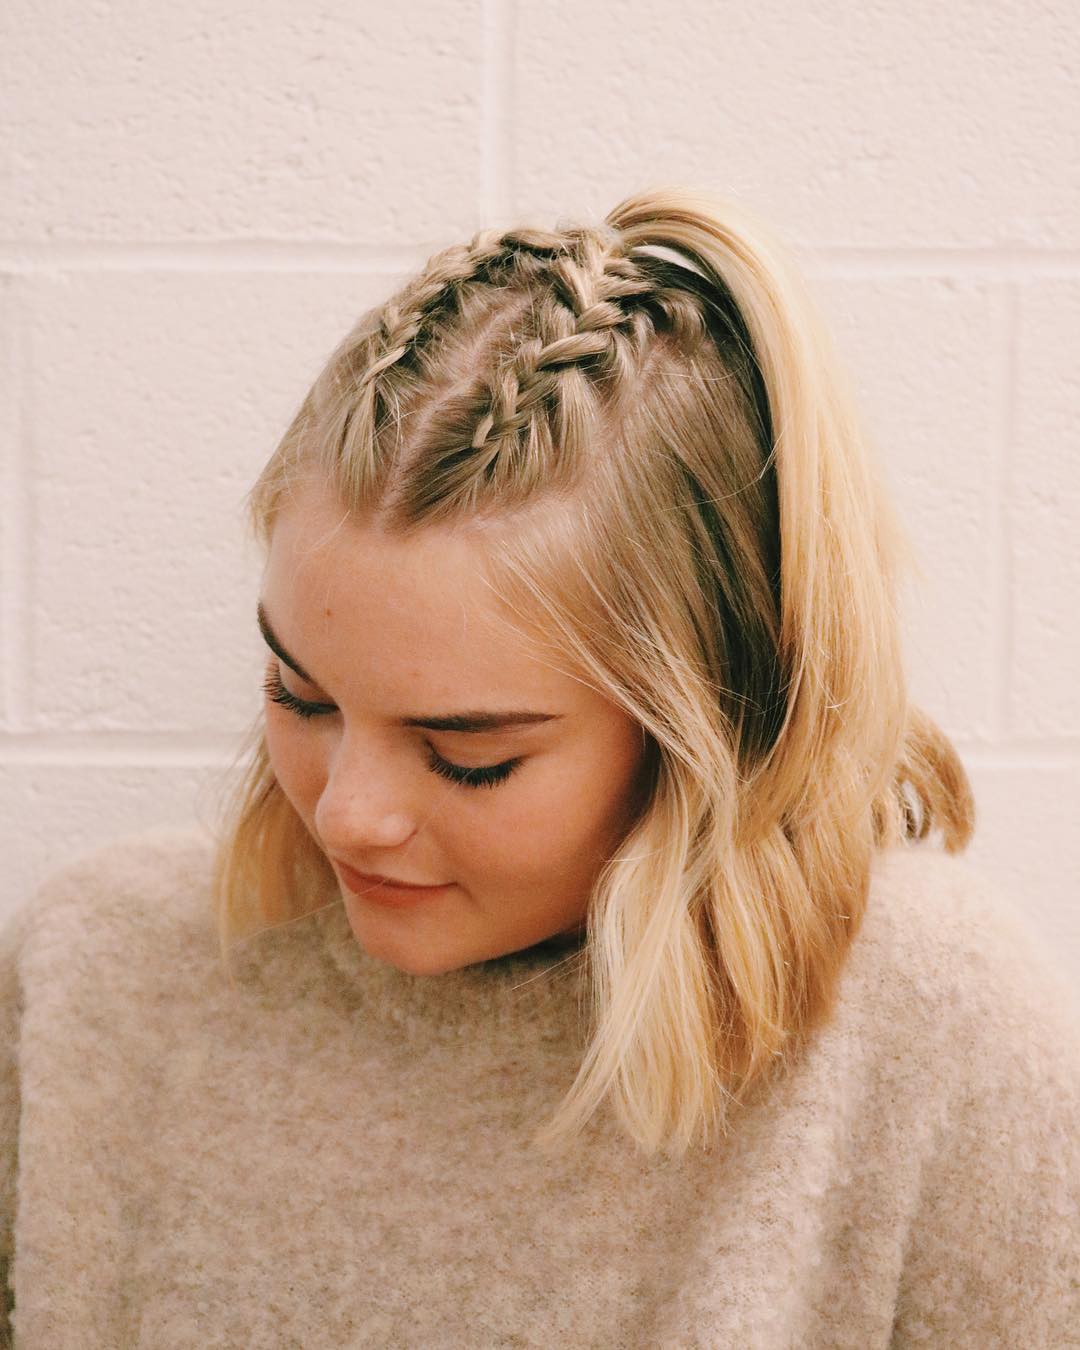 11 Post-Gym Hairdos so You Can Skip the Blow-Dryer